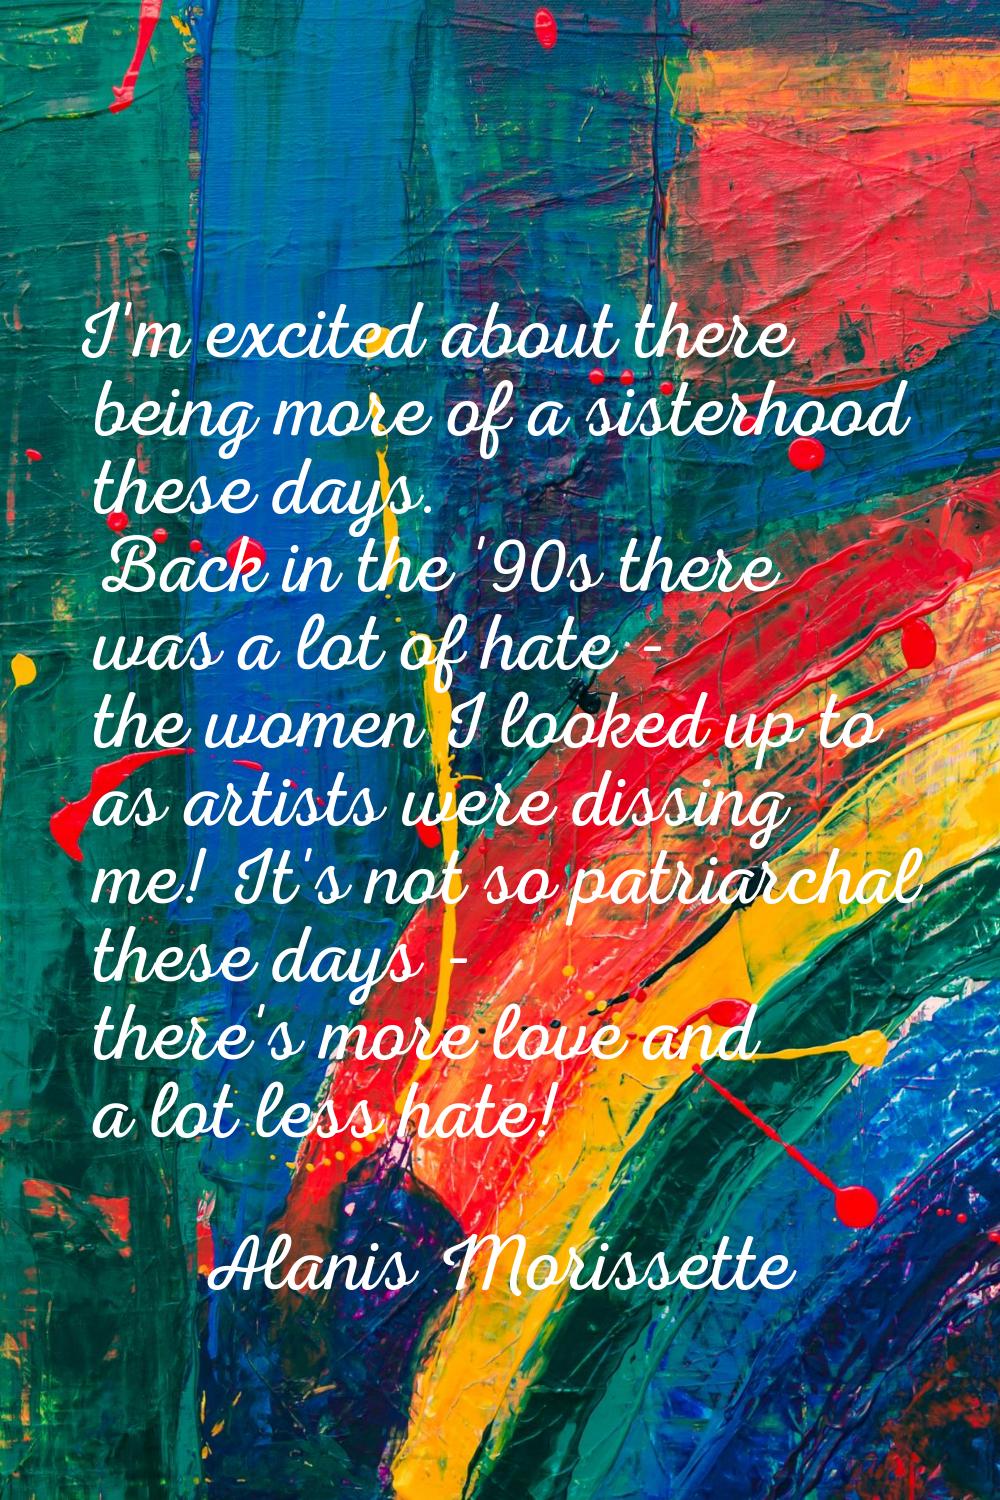 I'm excited about there being more of a sisterhood these days. Back in the '90s there was a lot of 